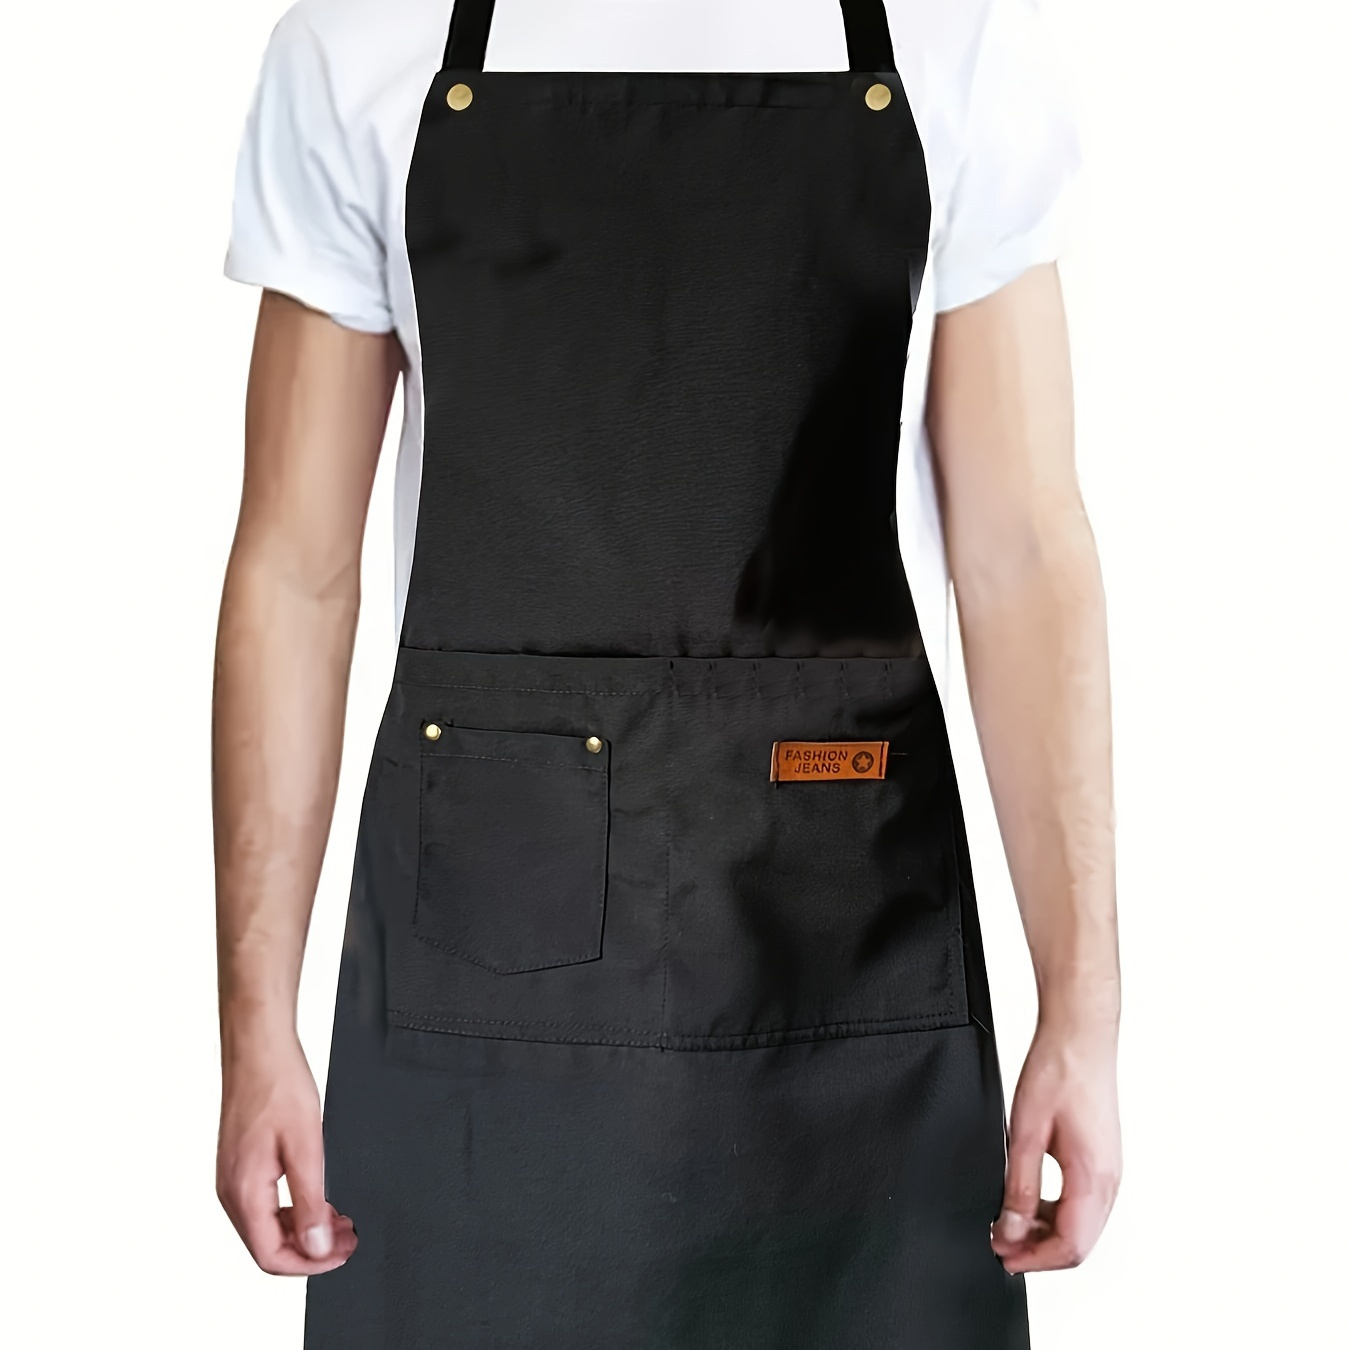 

1pc Thick Waterproof Apron, Simple Criss Cross Apron With Big Pocket For Kitchen Home Grilling, Baking And Serving In Restaurants And Cafes, Men's Workwear